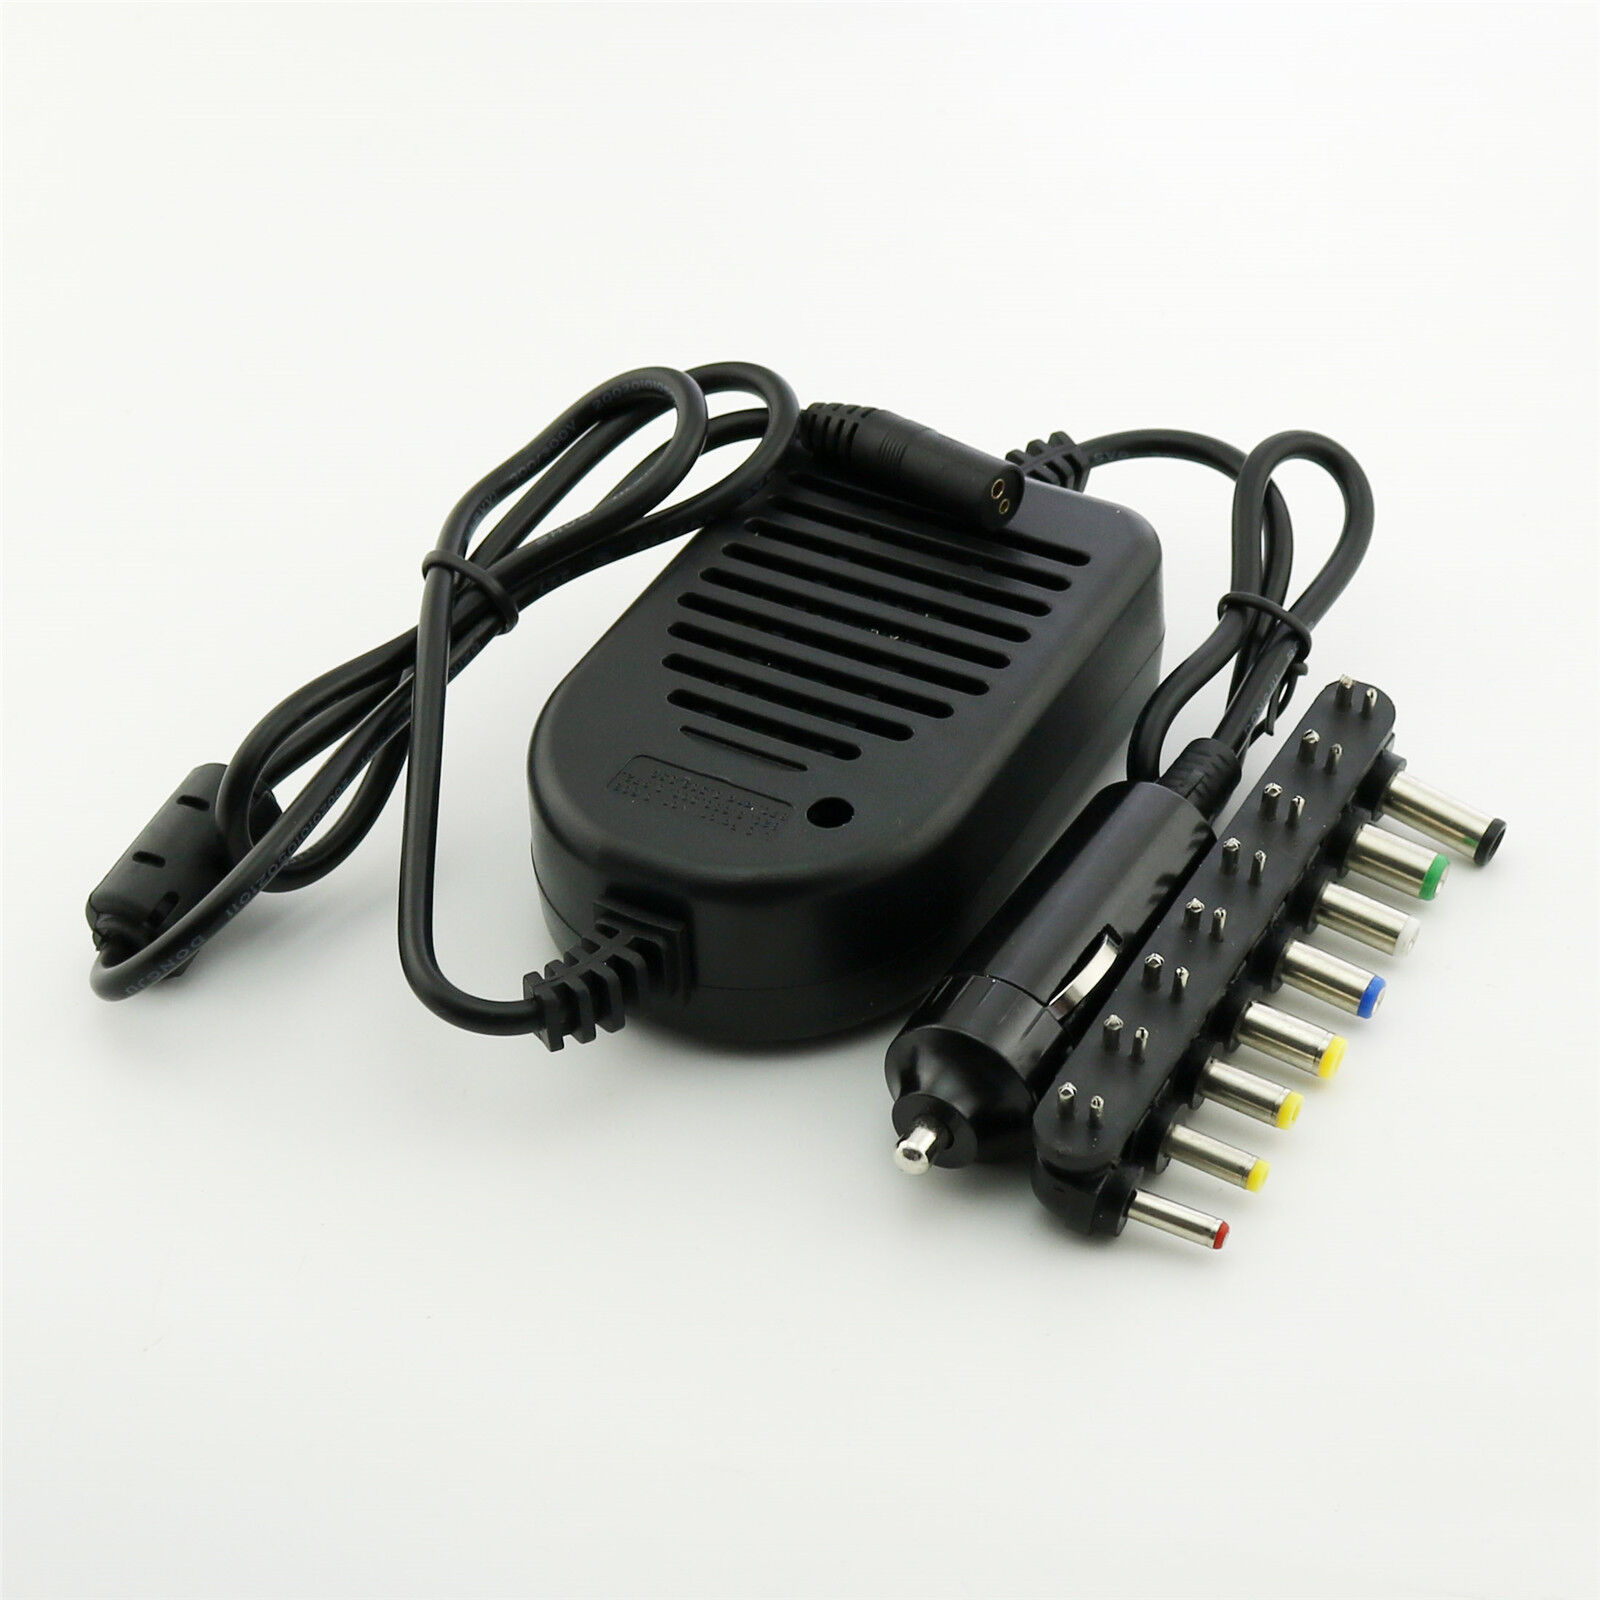 80W Universal Laptop Notebook Car Auto Charger DC Power Supply Adapter 15V-24V